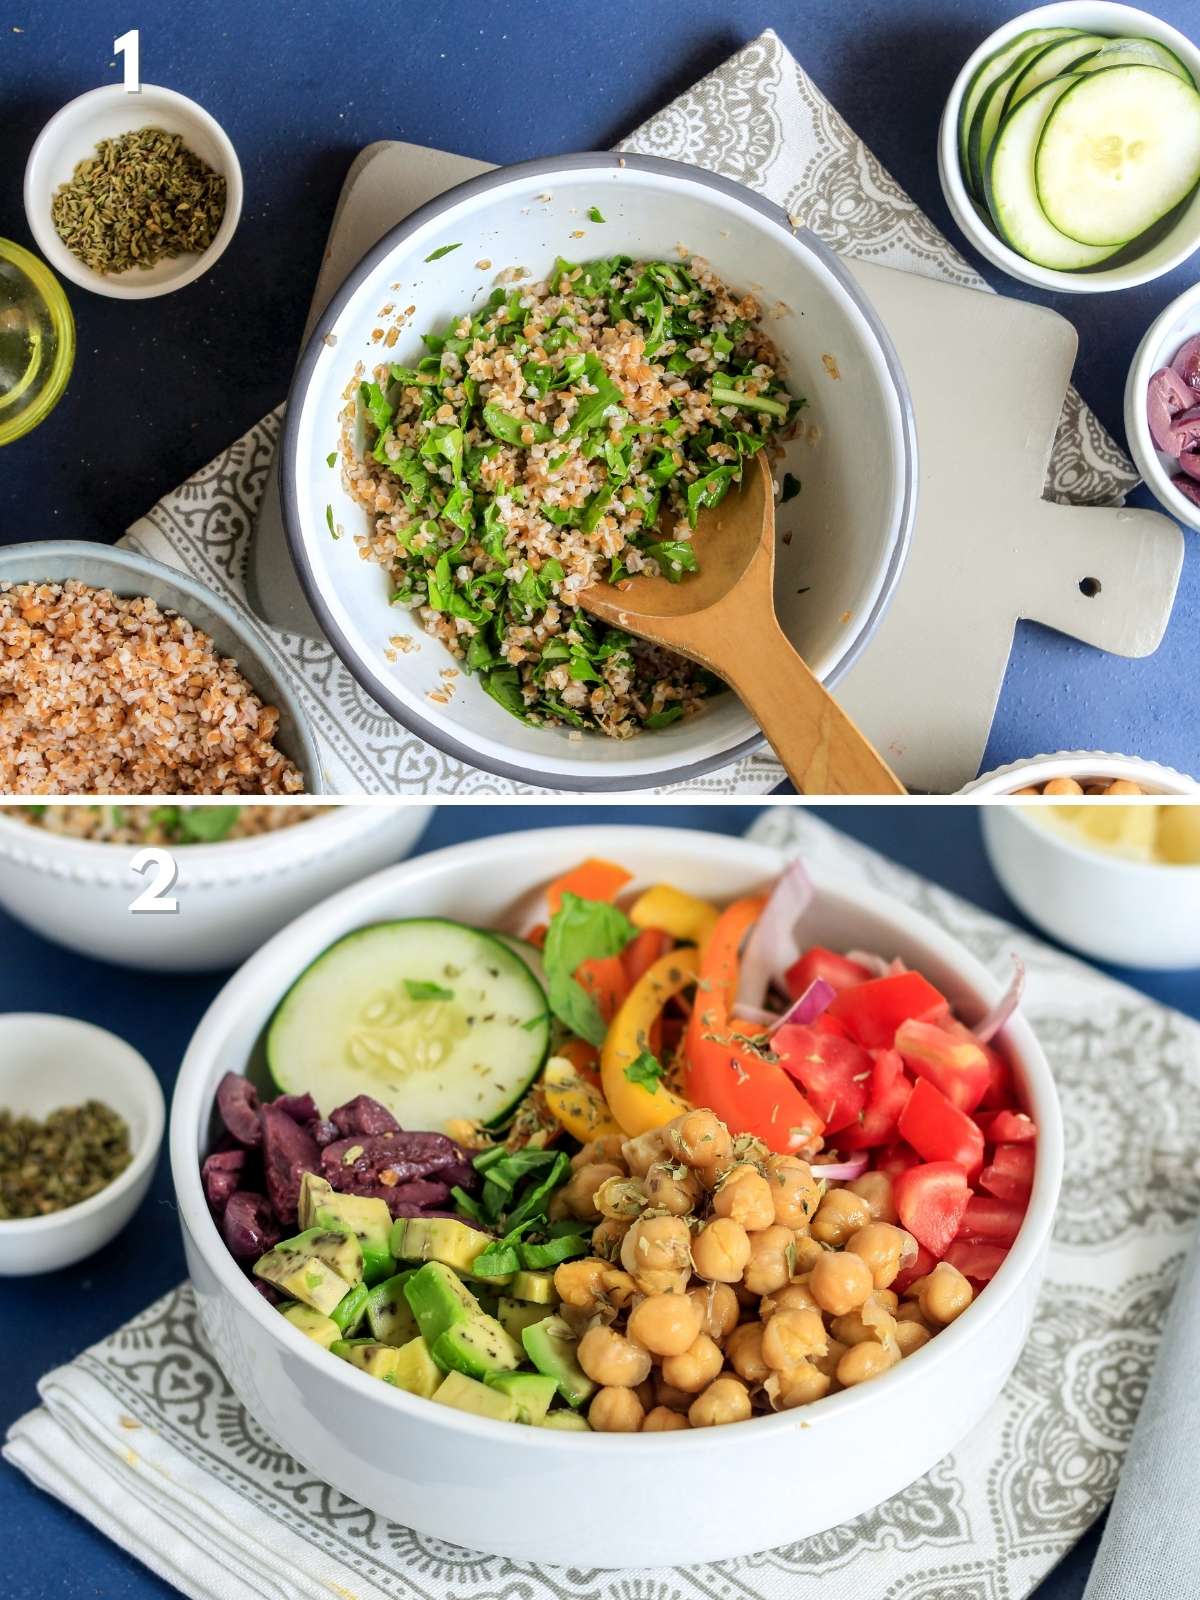 Collage of making grain bowls. Top is grain and arugula in a bowl and in the bottom topped with all the ingredients.